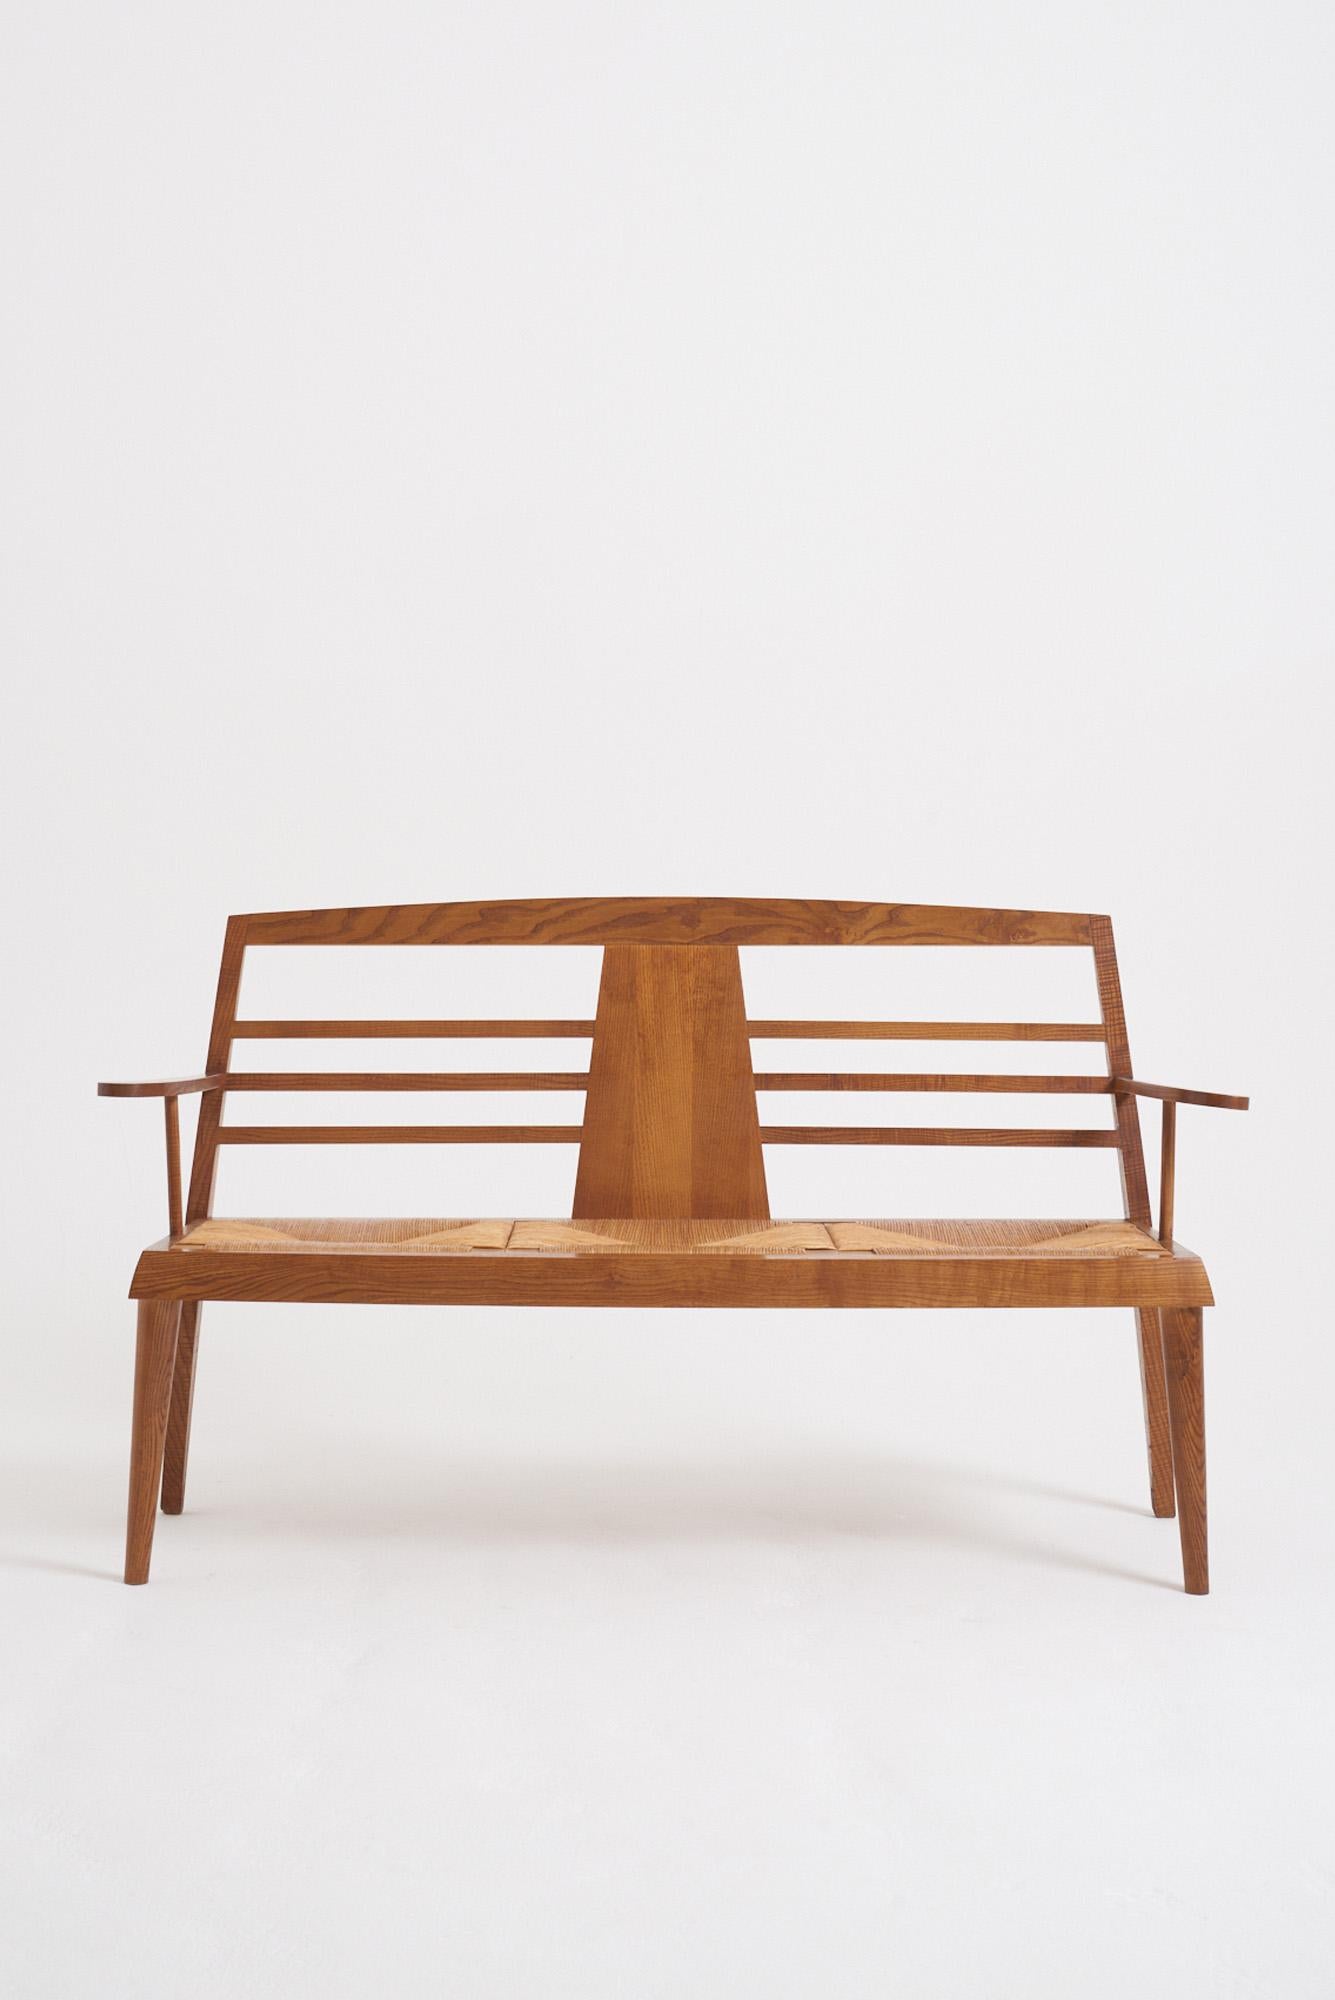 An ash and rush seat banquette
France, 1970-80s